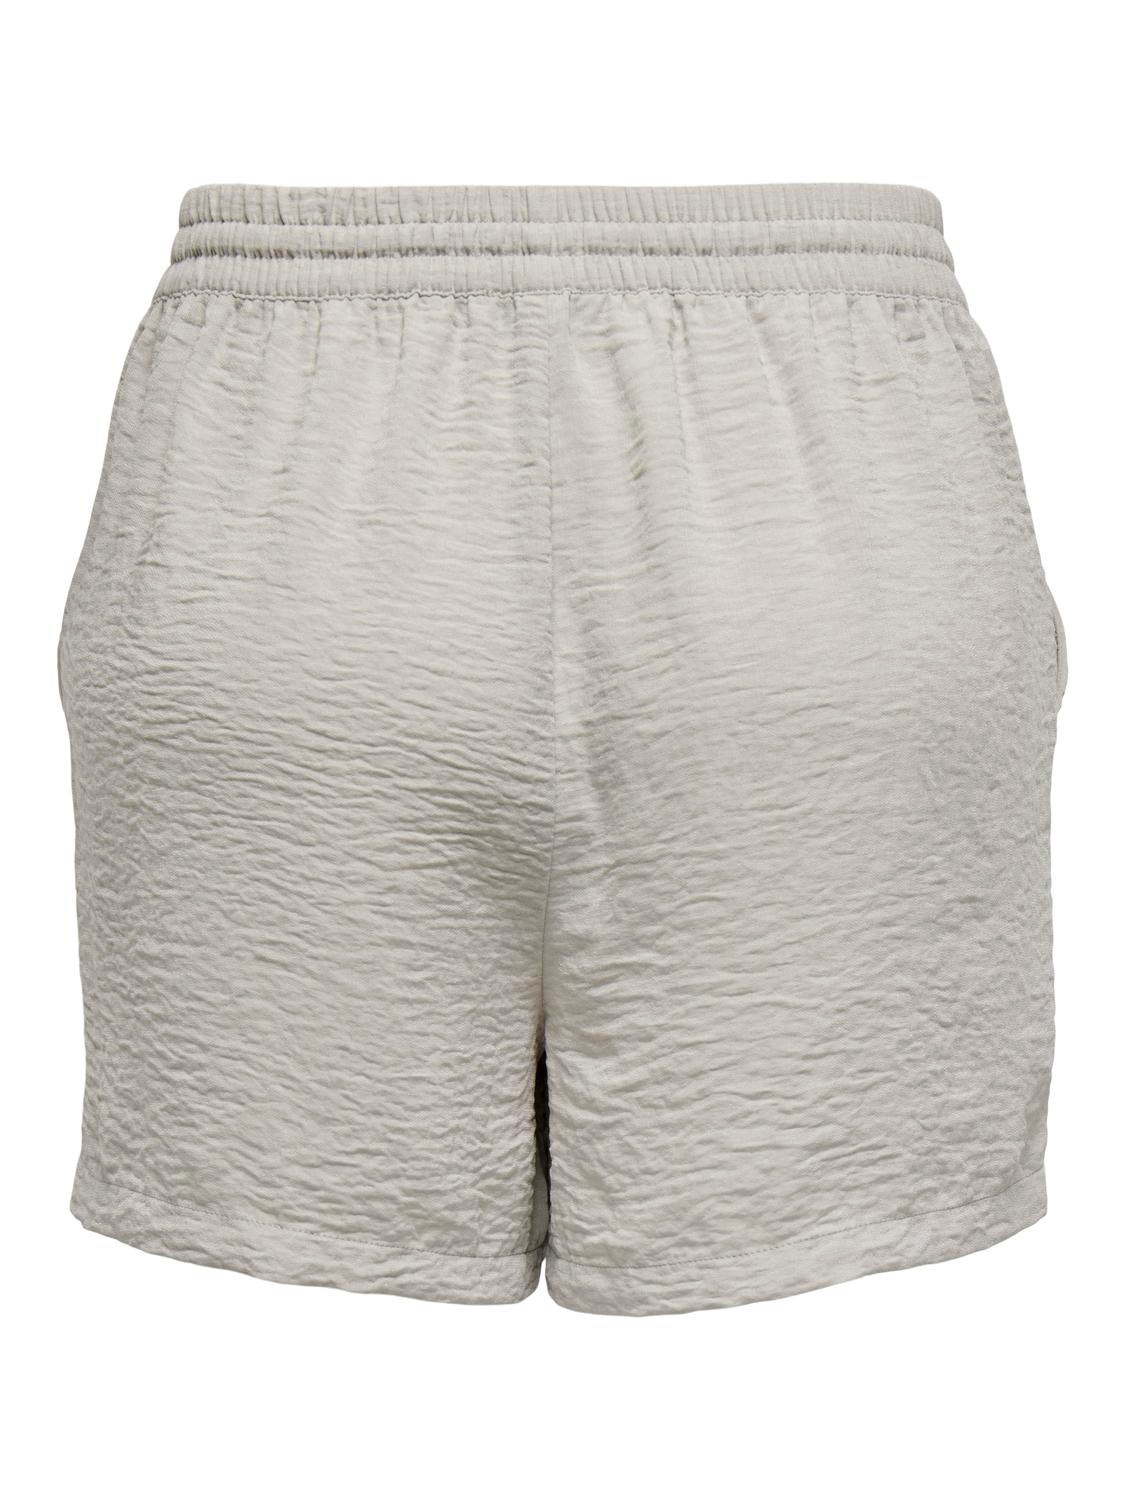 ONLY Regular fit Mid waist Shorts -Chateau Gray - 15326999